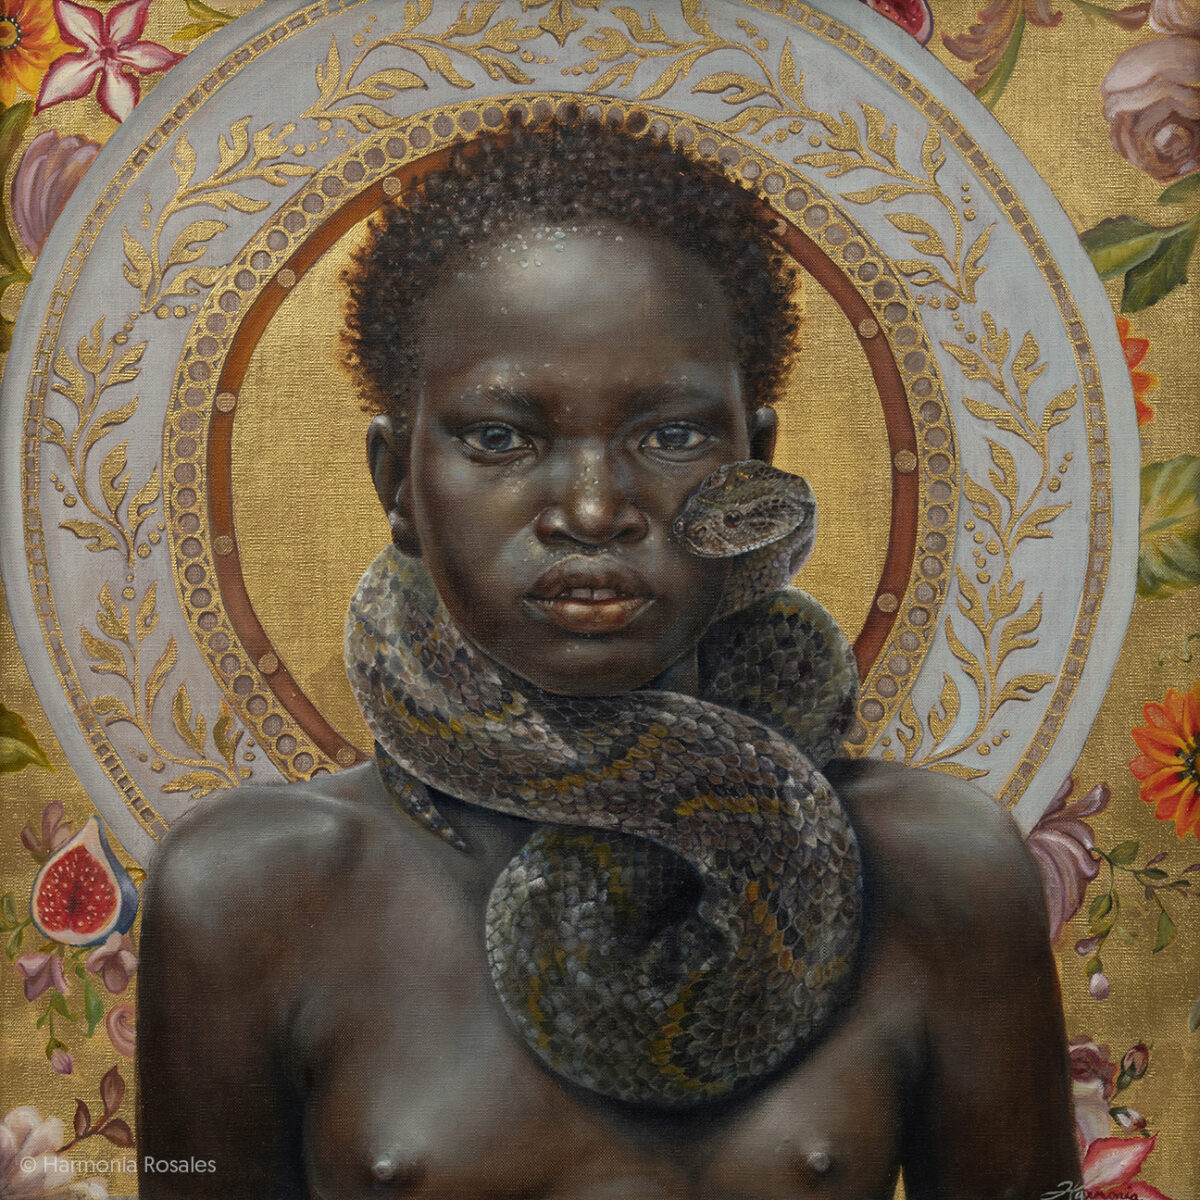 Powerful Portraits Of Black Figures Painted In The Classical European Style By Harmonia Rosales 1